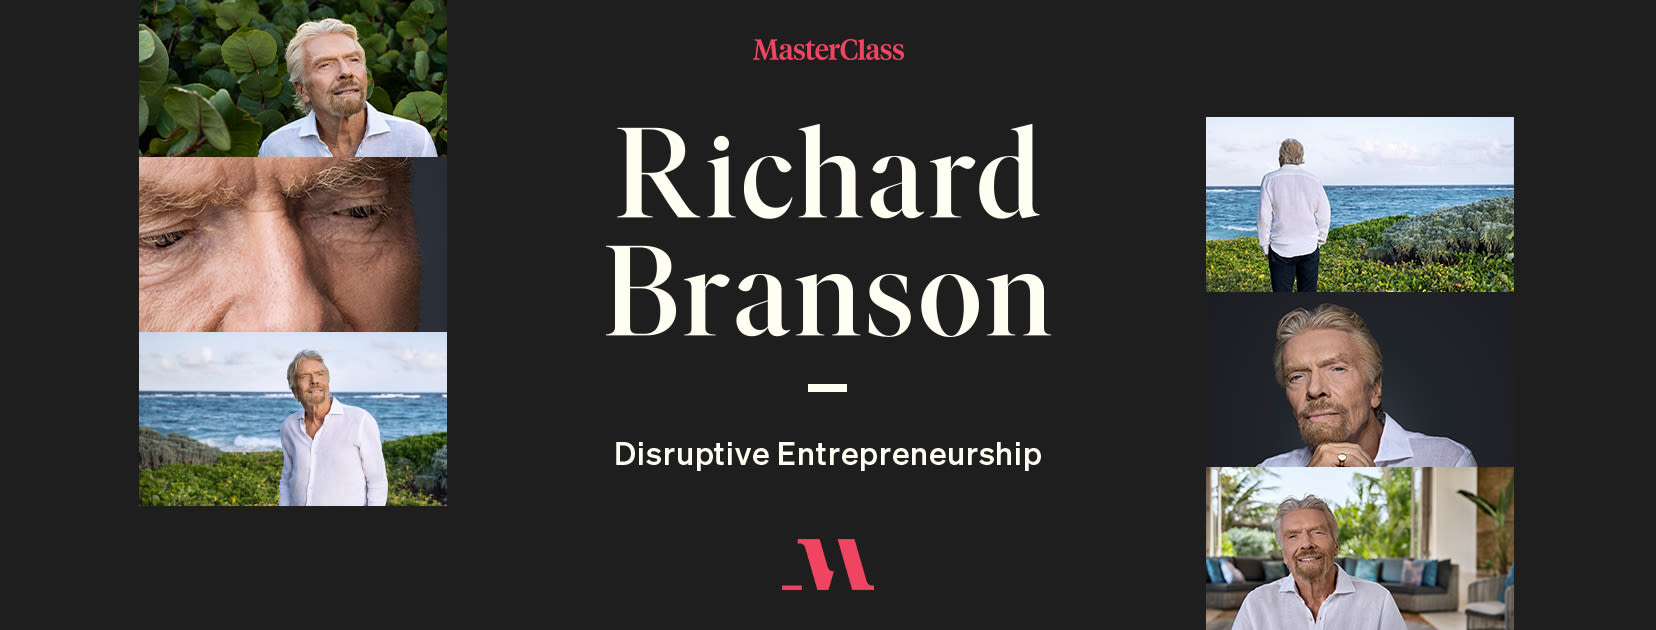 Richard Branson launches his new series on MasterClass